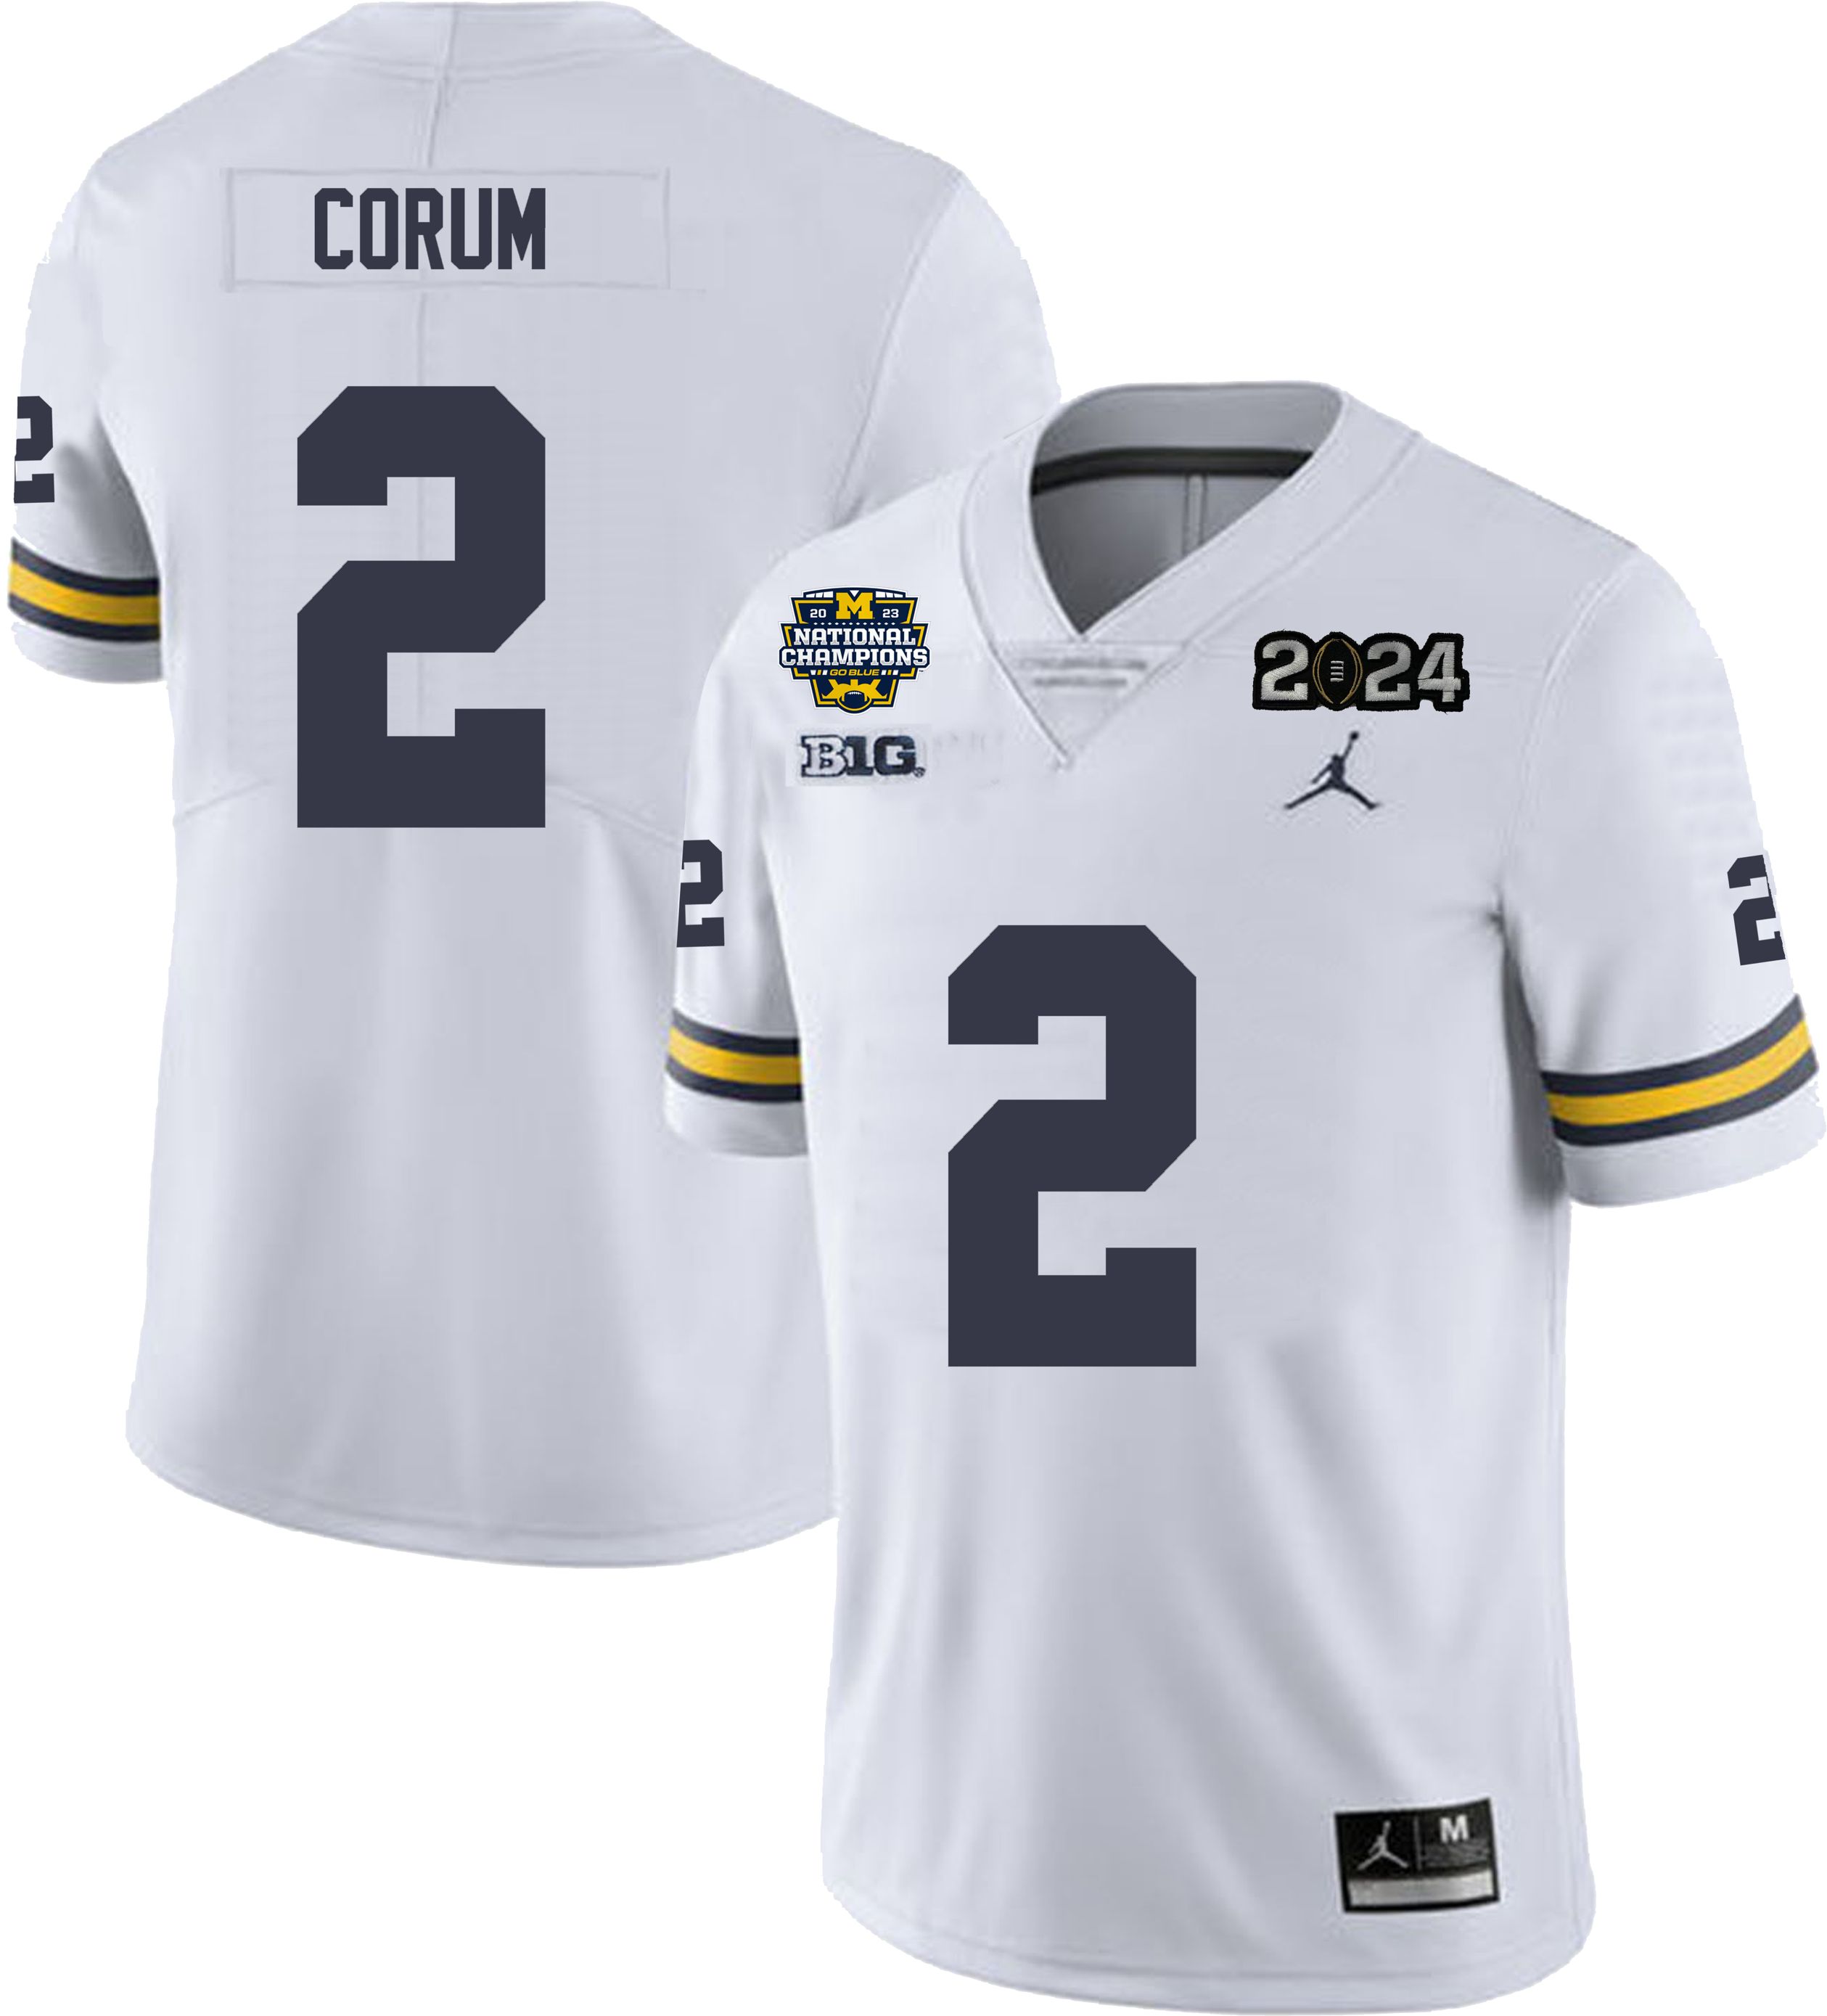 Men's NCAA Michigan Wolverines Blake Corum #2 White National Champions Stitched College Football Jersey OL255T2WR